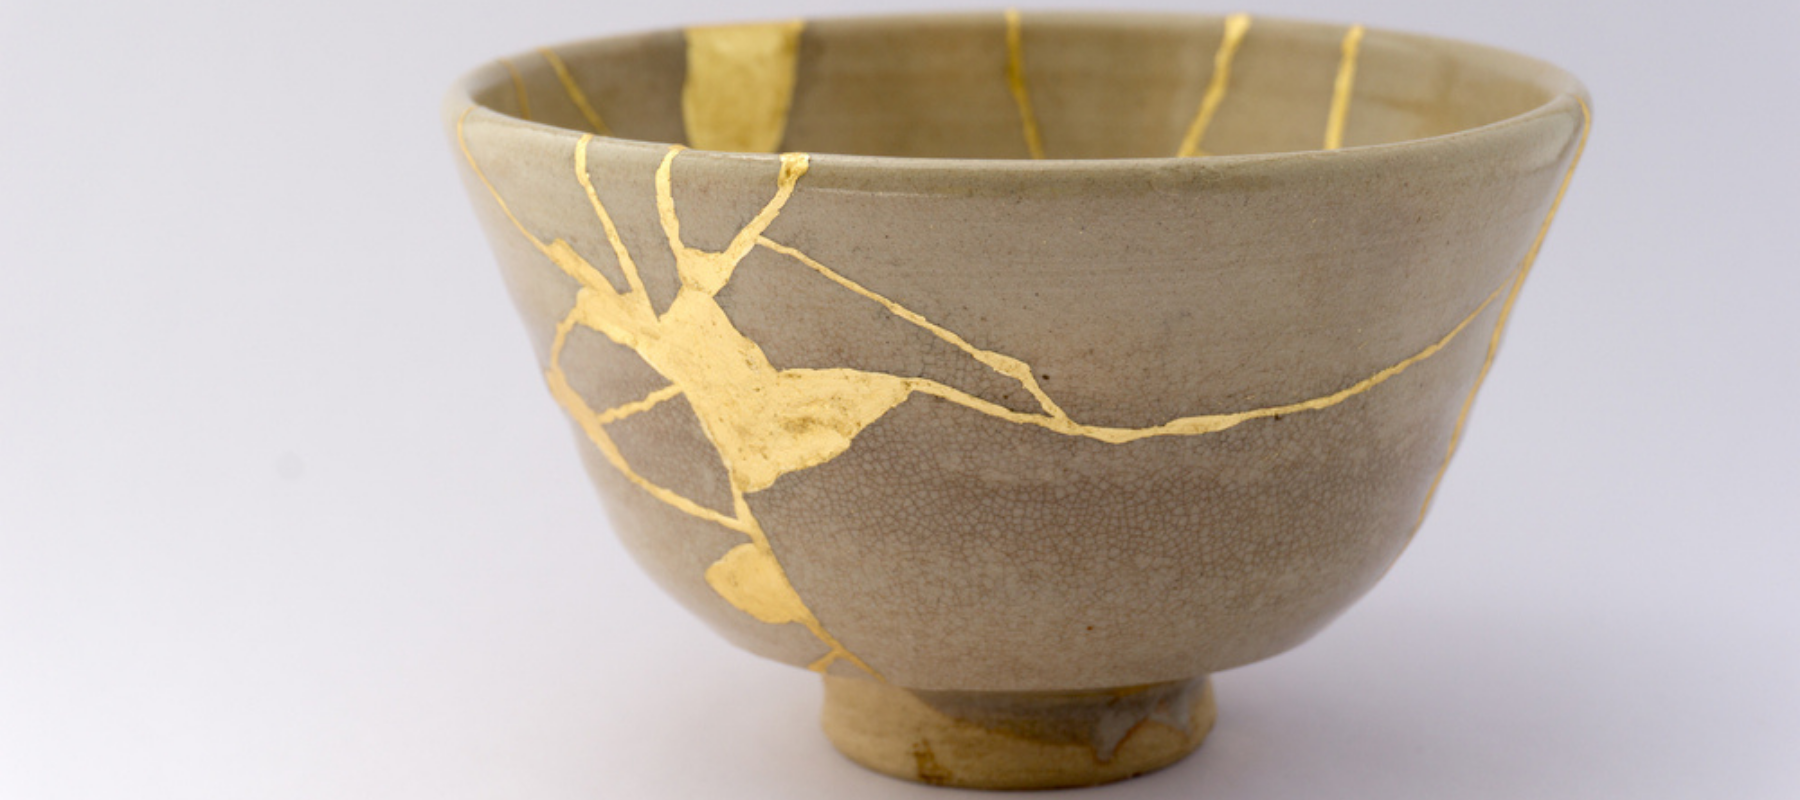 Kintsugi - Embracing our Imperfections to Create Something Beautiful